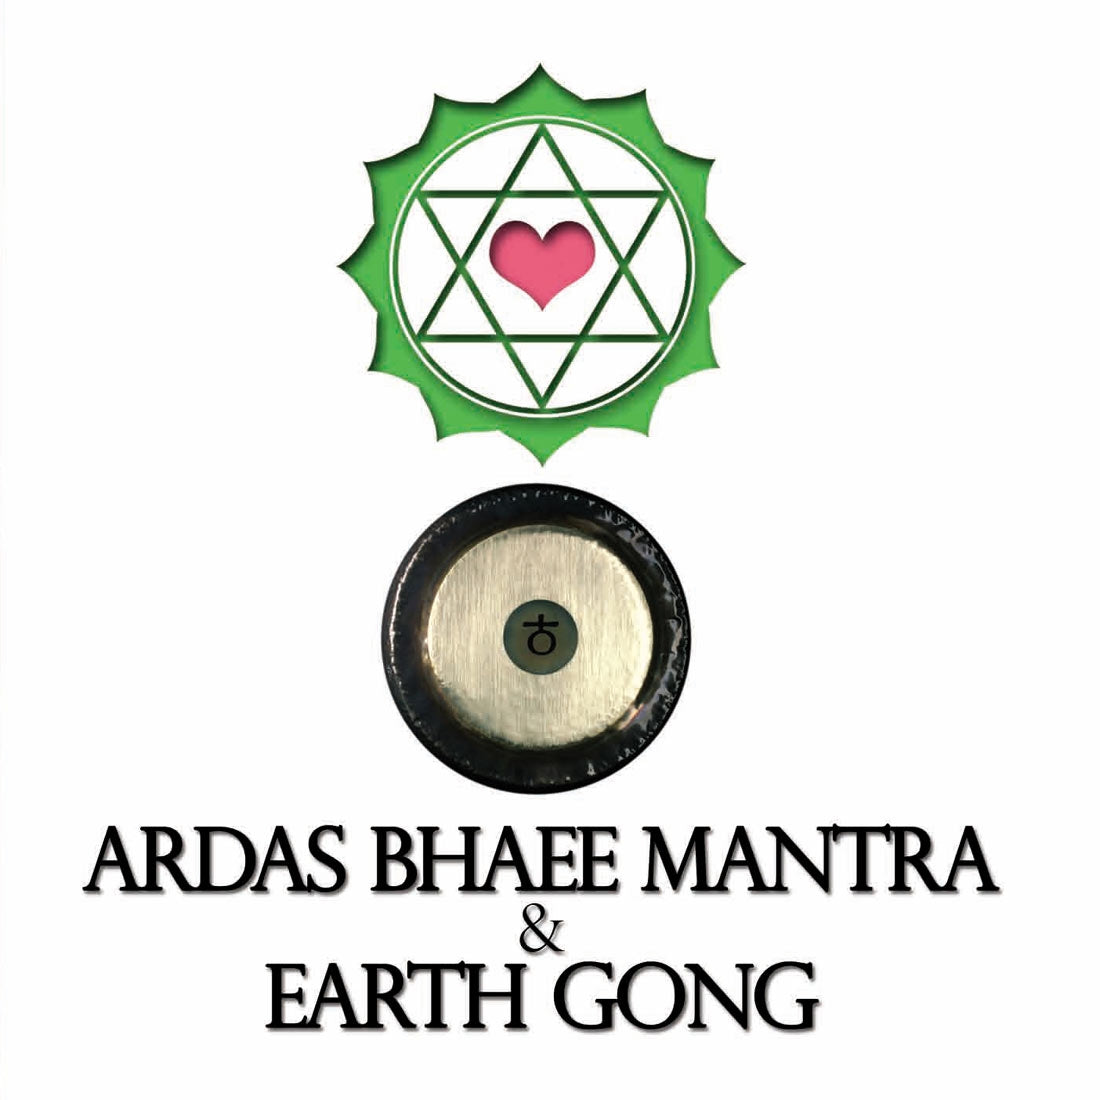 Ardas Bhaee Mantra &amp; Earth Gong - Mark Swan complete